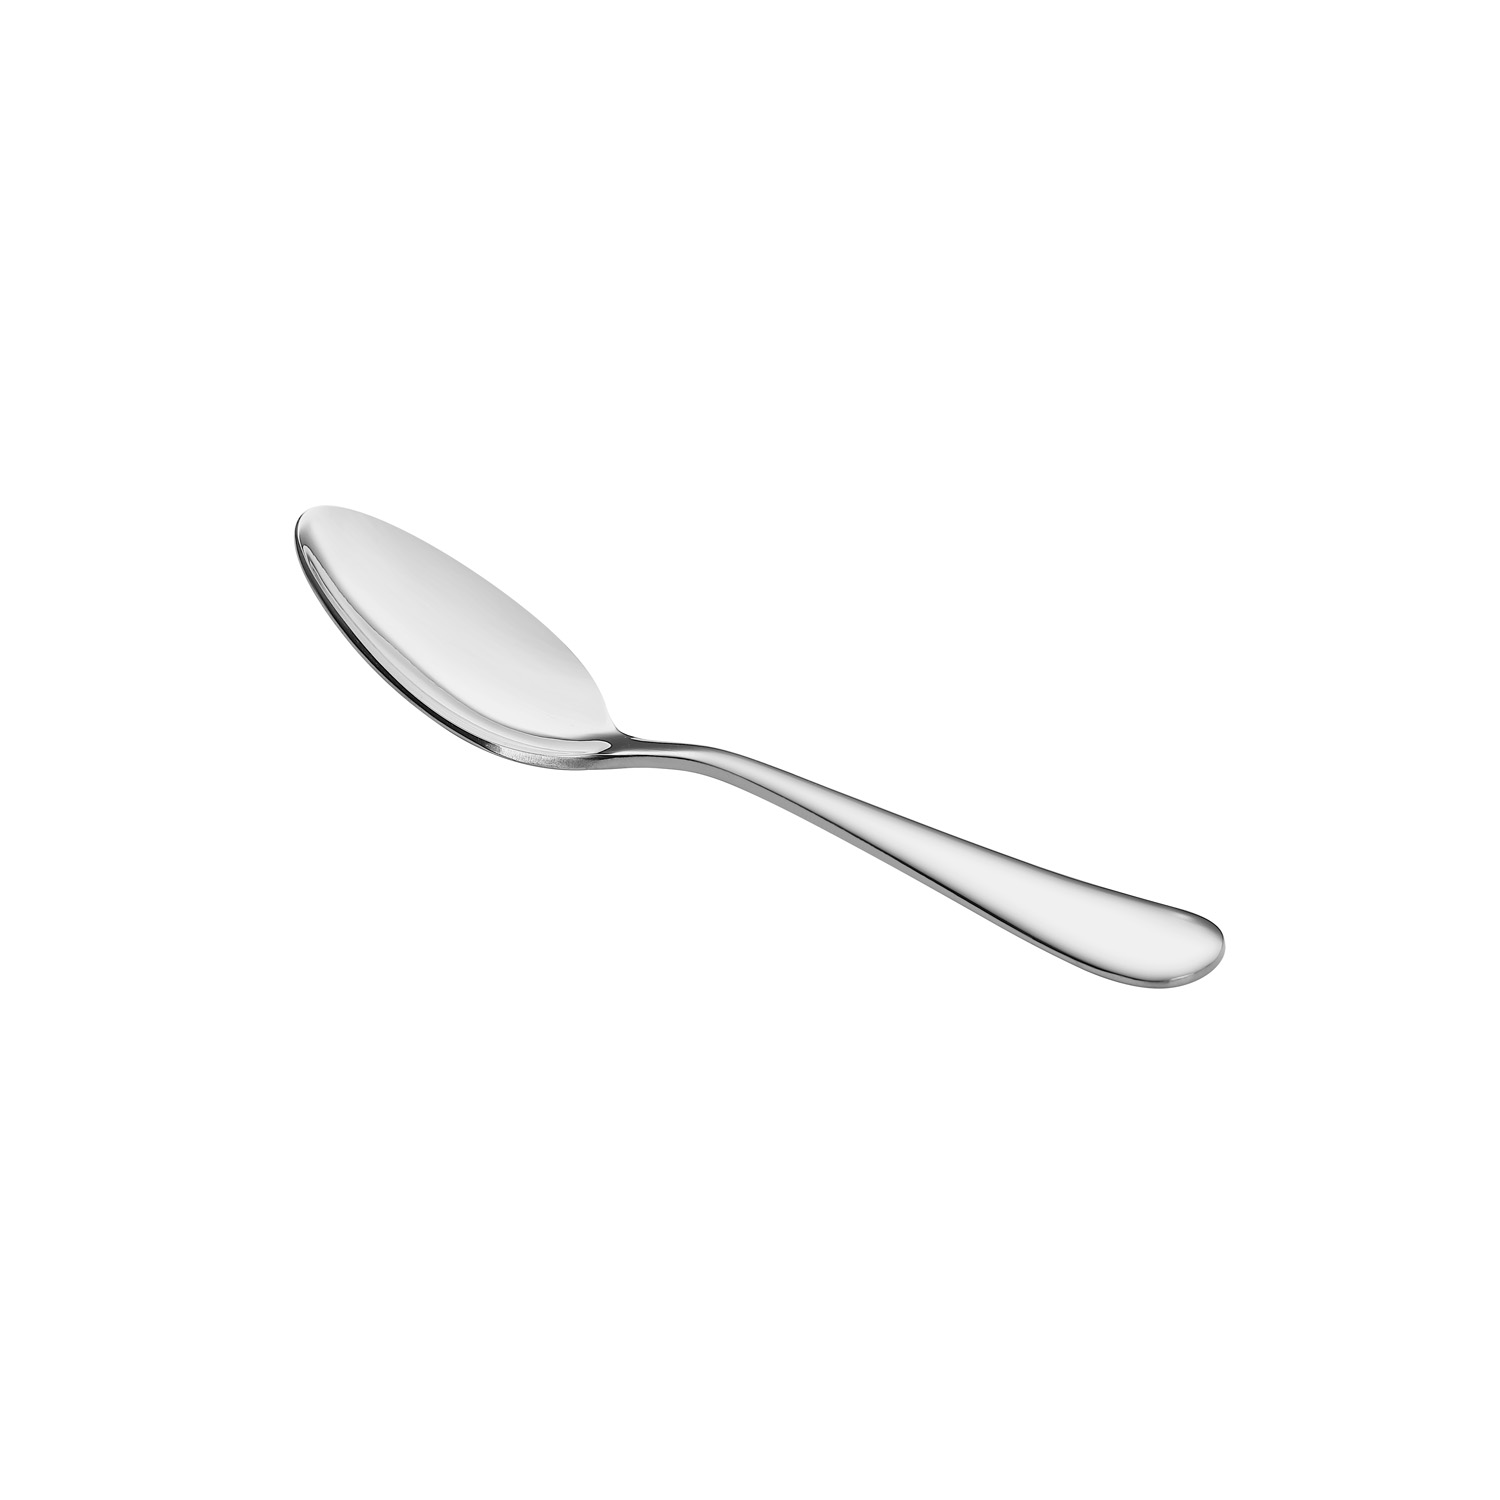 CAC China 8003-09 Noble Demitasse Spoon, Extra Heavyweight 18/8, 4 1/2"